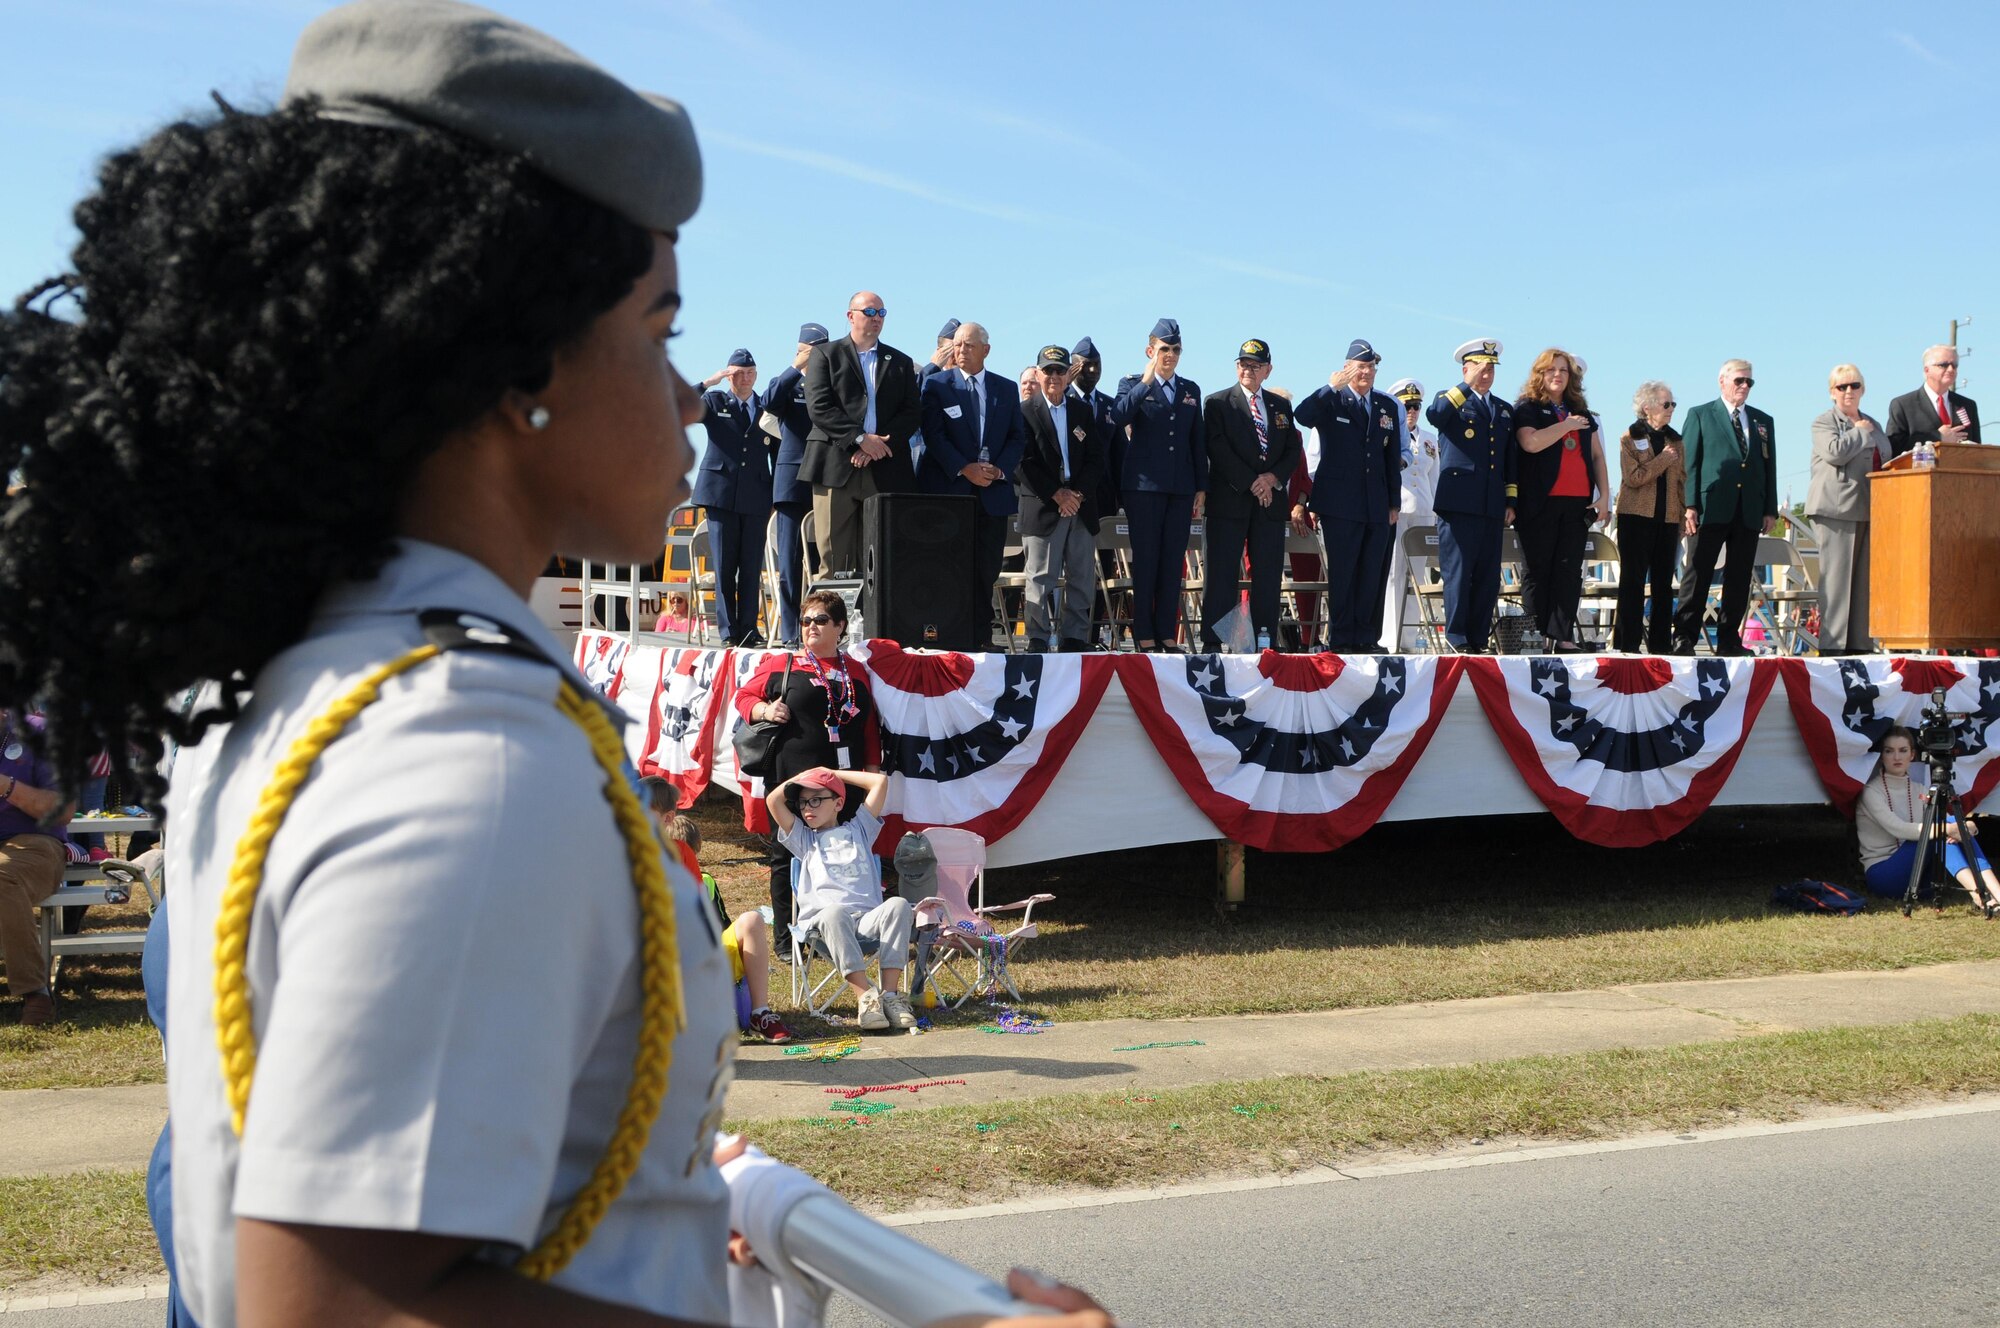 Gulf Coast military and civilian leadership show their appreciation to Junior ROTC members as they pass by at the 16th Annual Gulf Coast Veterans Day Parade Nov. 12, 2016, in D’Iberville, Miss. More than 5,000 Mississippi and Louisiana citizens watch the parade honoring Gulf Coast veterans. Keesler Honor Guard members, base leadership and more than 215 81st Training Group Airmen with the 50 State Flag Team and Drum and Bugle Corps also came out to celebrate the holiday. (U.S. Air Force photo by Senior Airman Holly Mansfield)